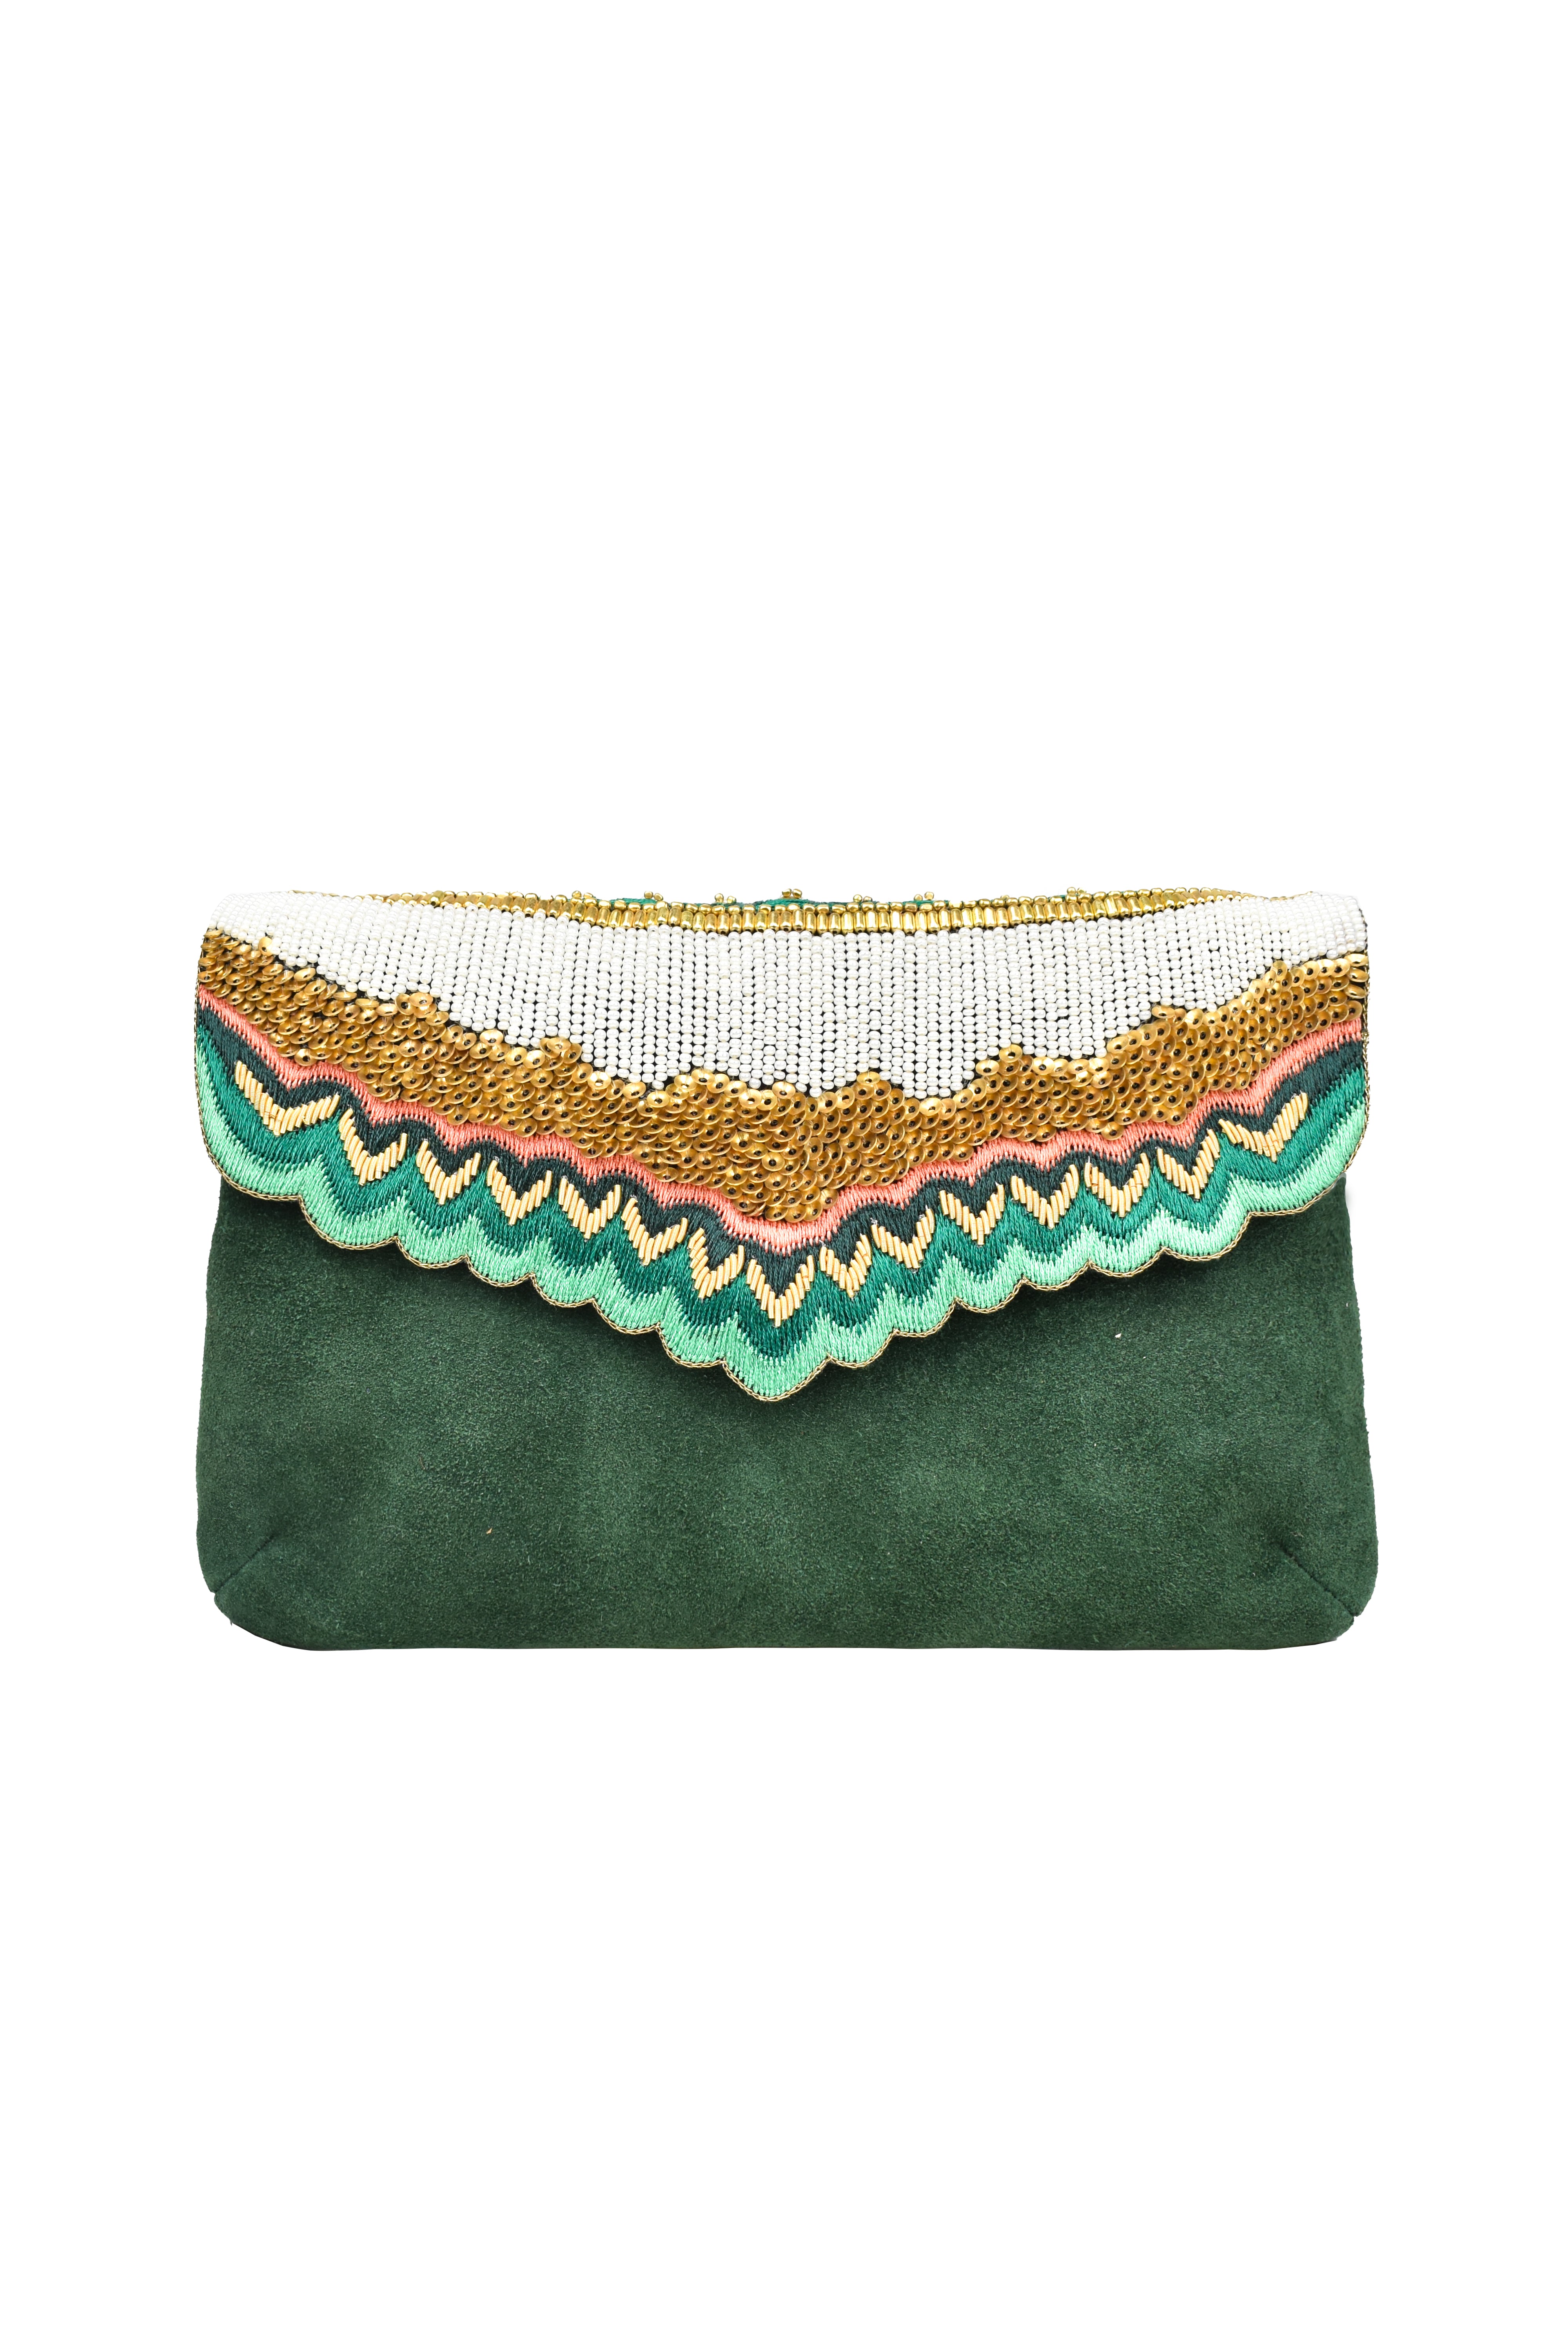 mahes bag in prairie green nahua official hand embrodiered suede clutch or cross body bag